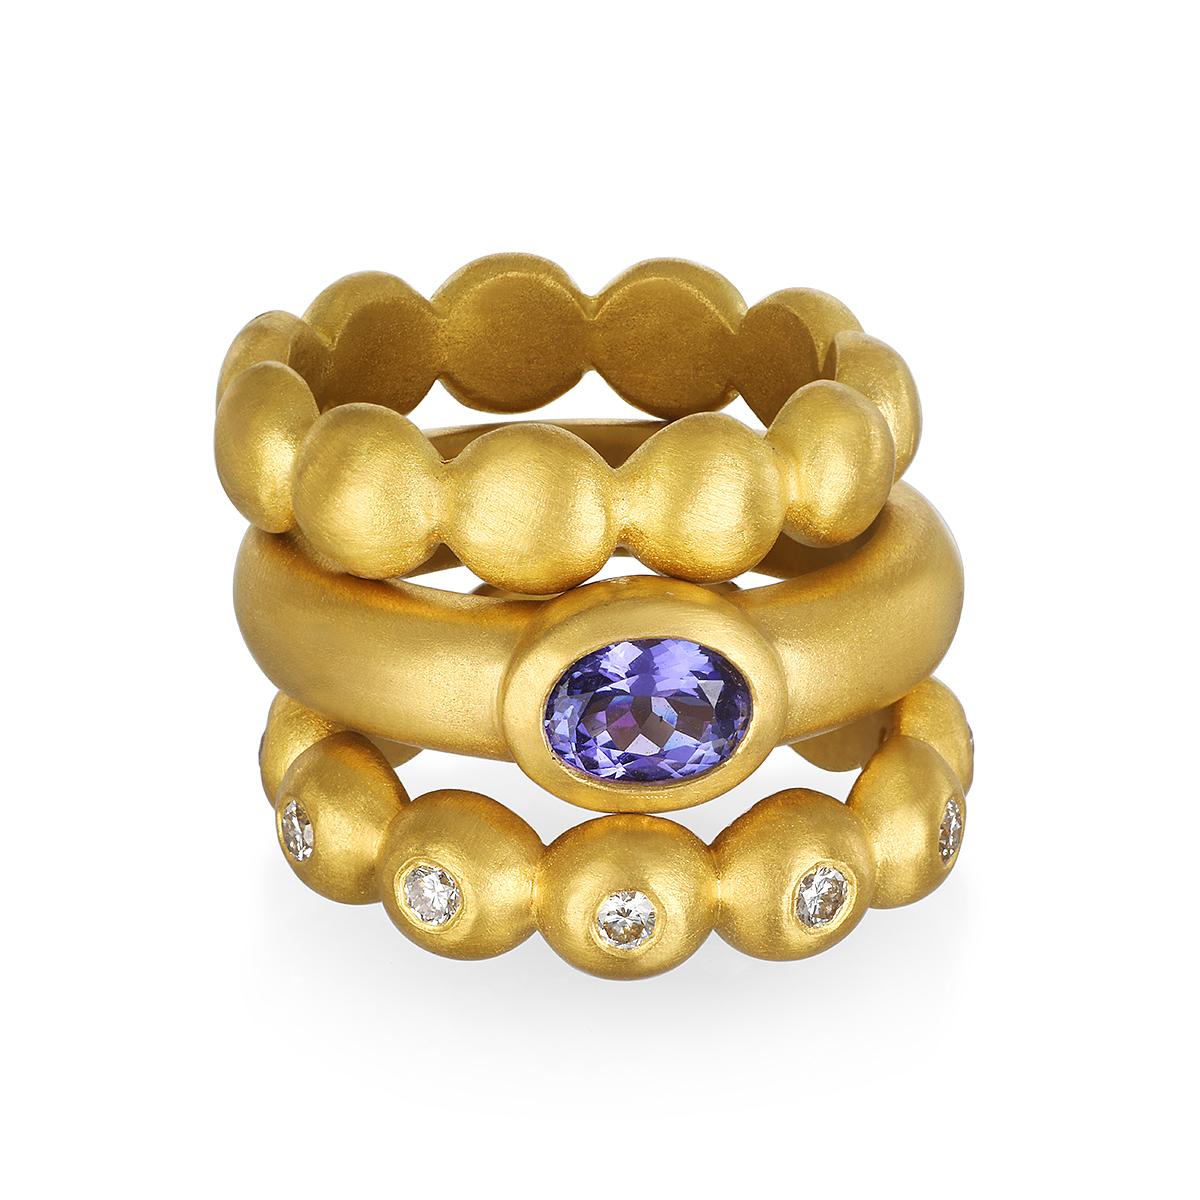 Faye Kim 22 Karat Gold Granulation Bead Band Ring In New Condition For Sale In Westport, CT